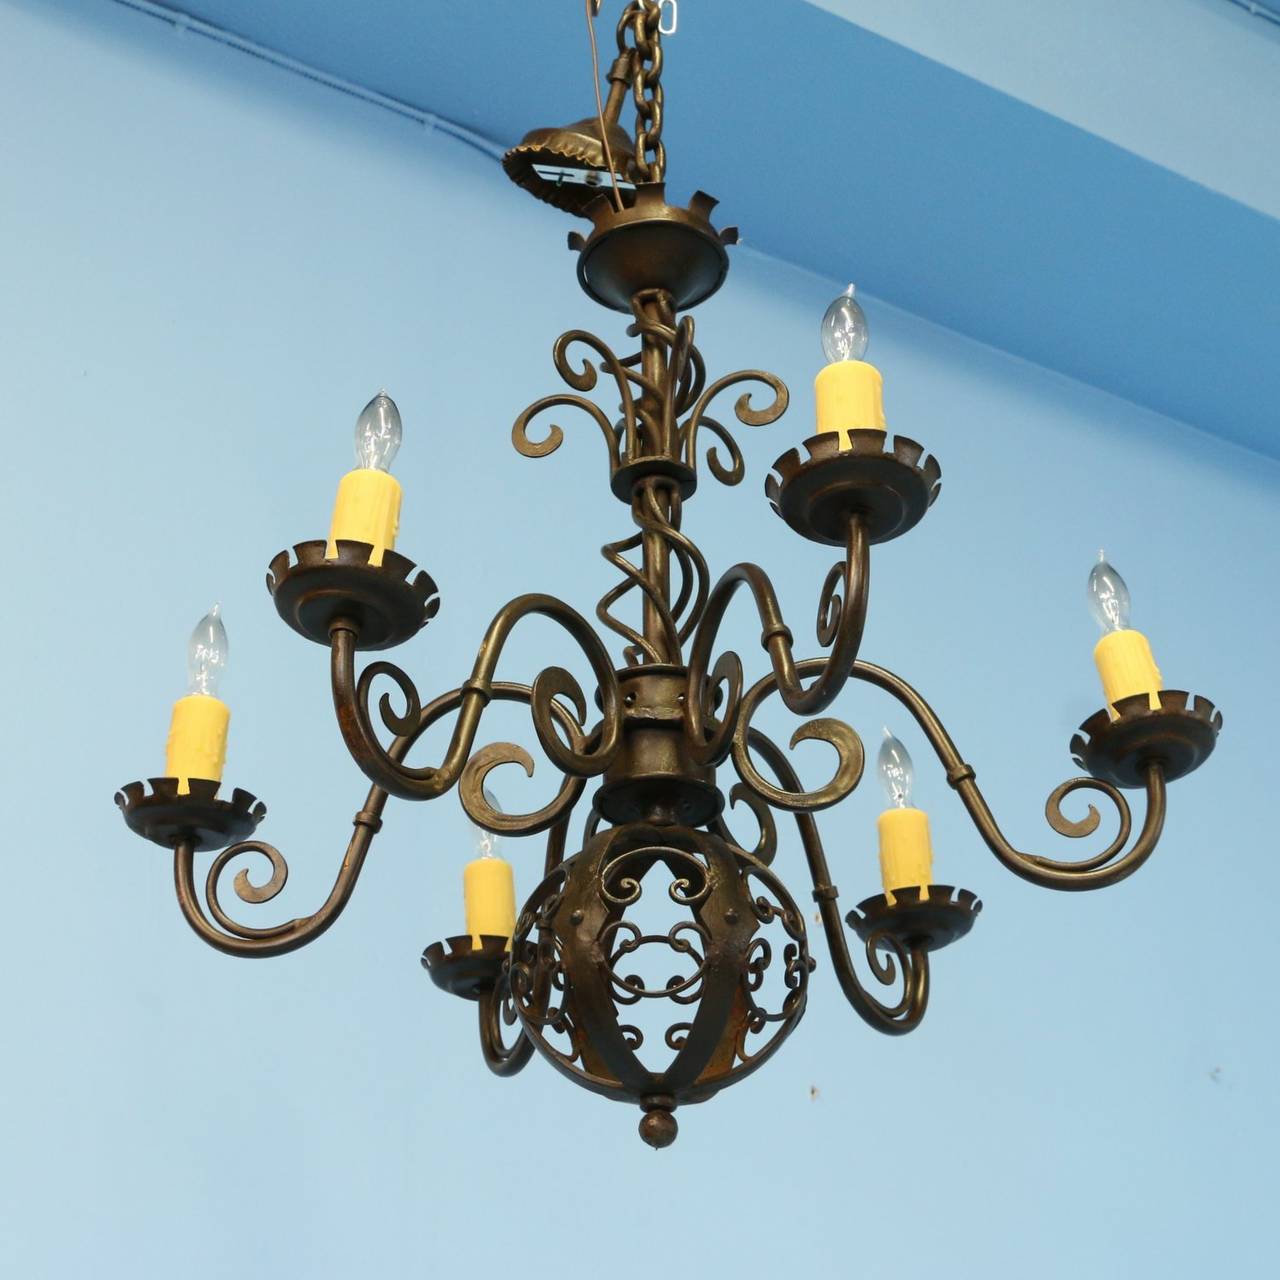 This fabulous hand-wrought iron chandelier is from the early 1900's in Denmark. Please examine the close up photos to appreciate the intricate scroll work and decorative sphere at the bottom. It has been wired for U.S. electricity and uses standard